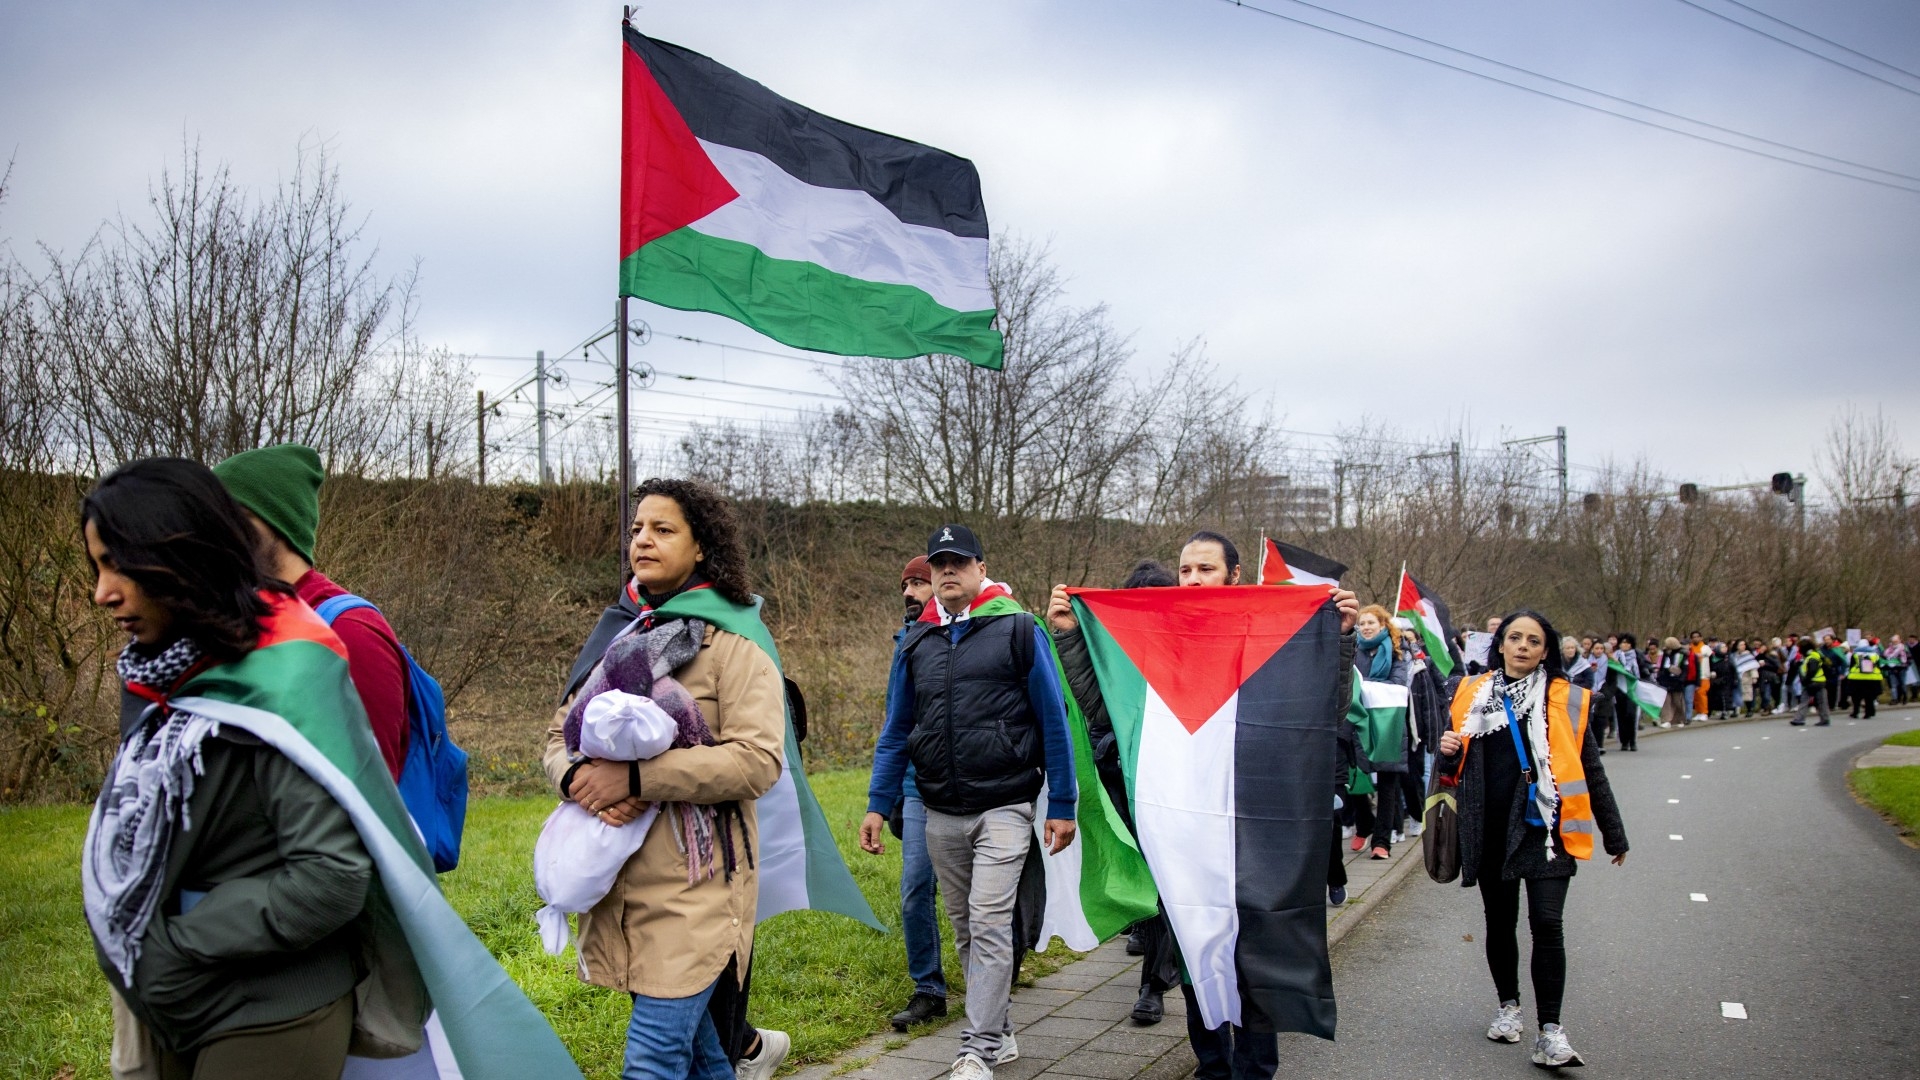 Participants attend a march from Leiden to the International Criminal Court in The Hague, in solidarity with Palestinians of the Gaza Strip, in Leiden, on December 17